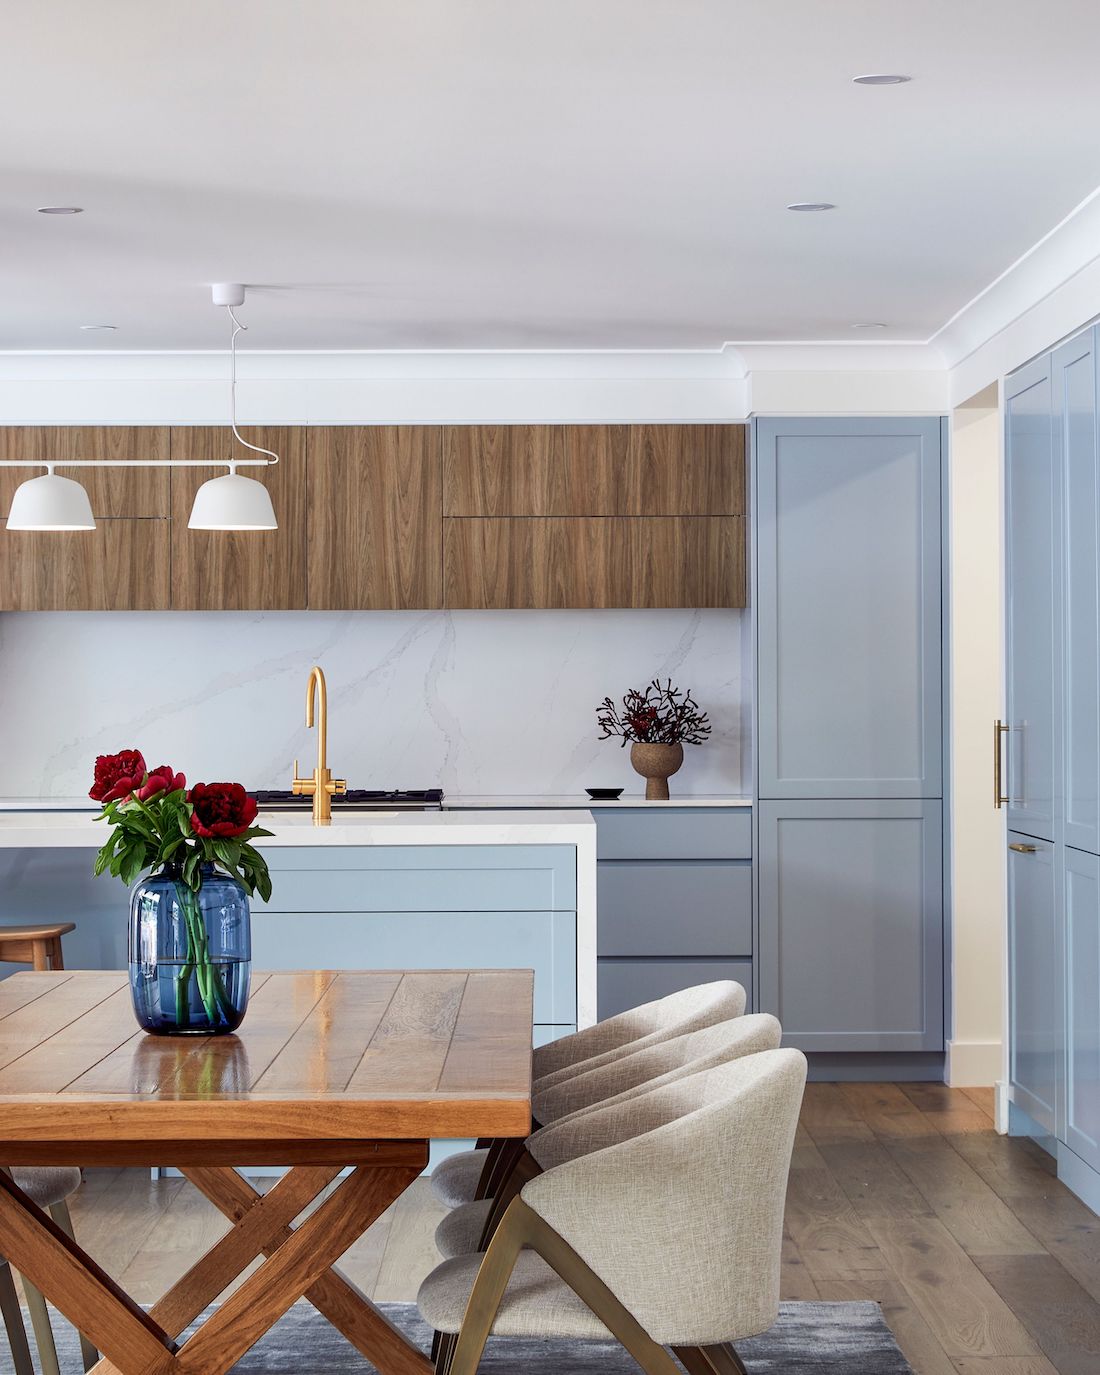 Hamptons kitchen with blue and timber mixed cabinetry